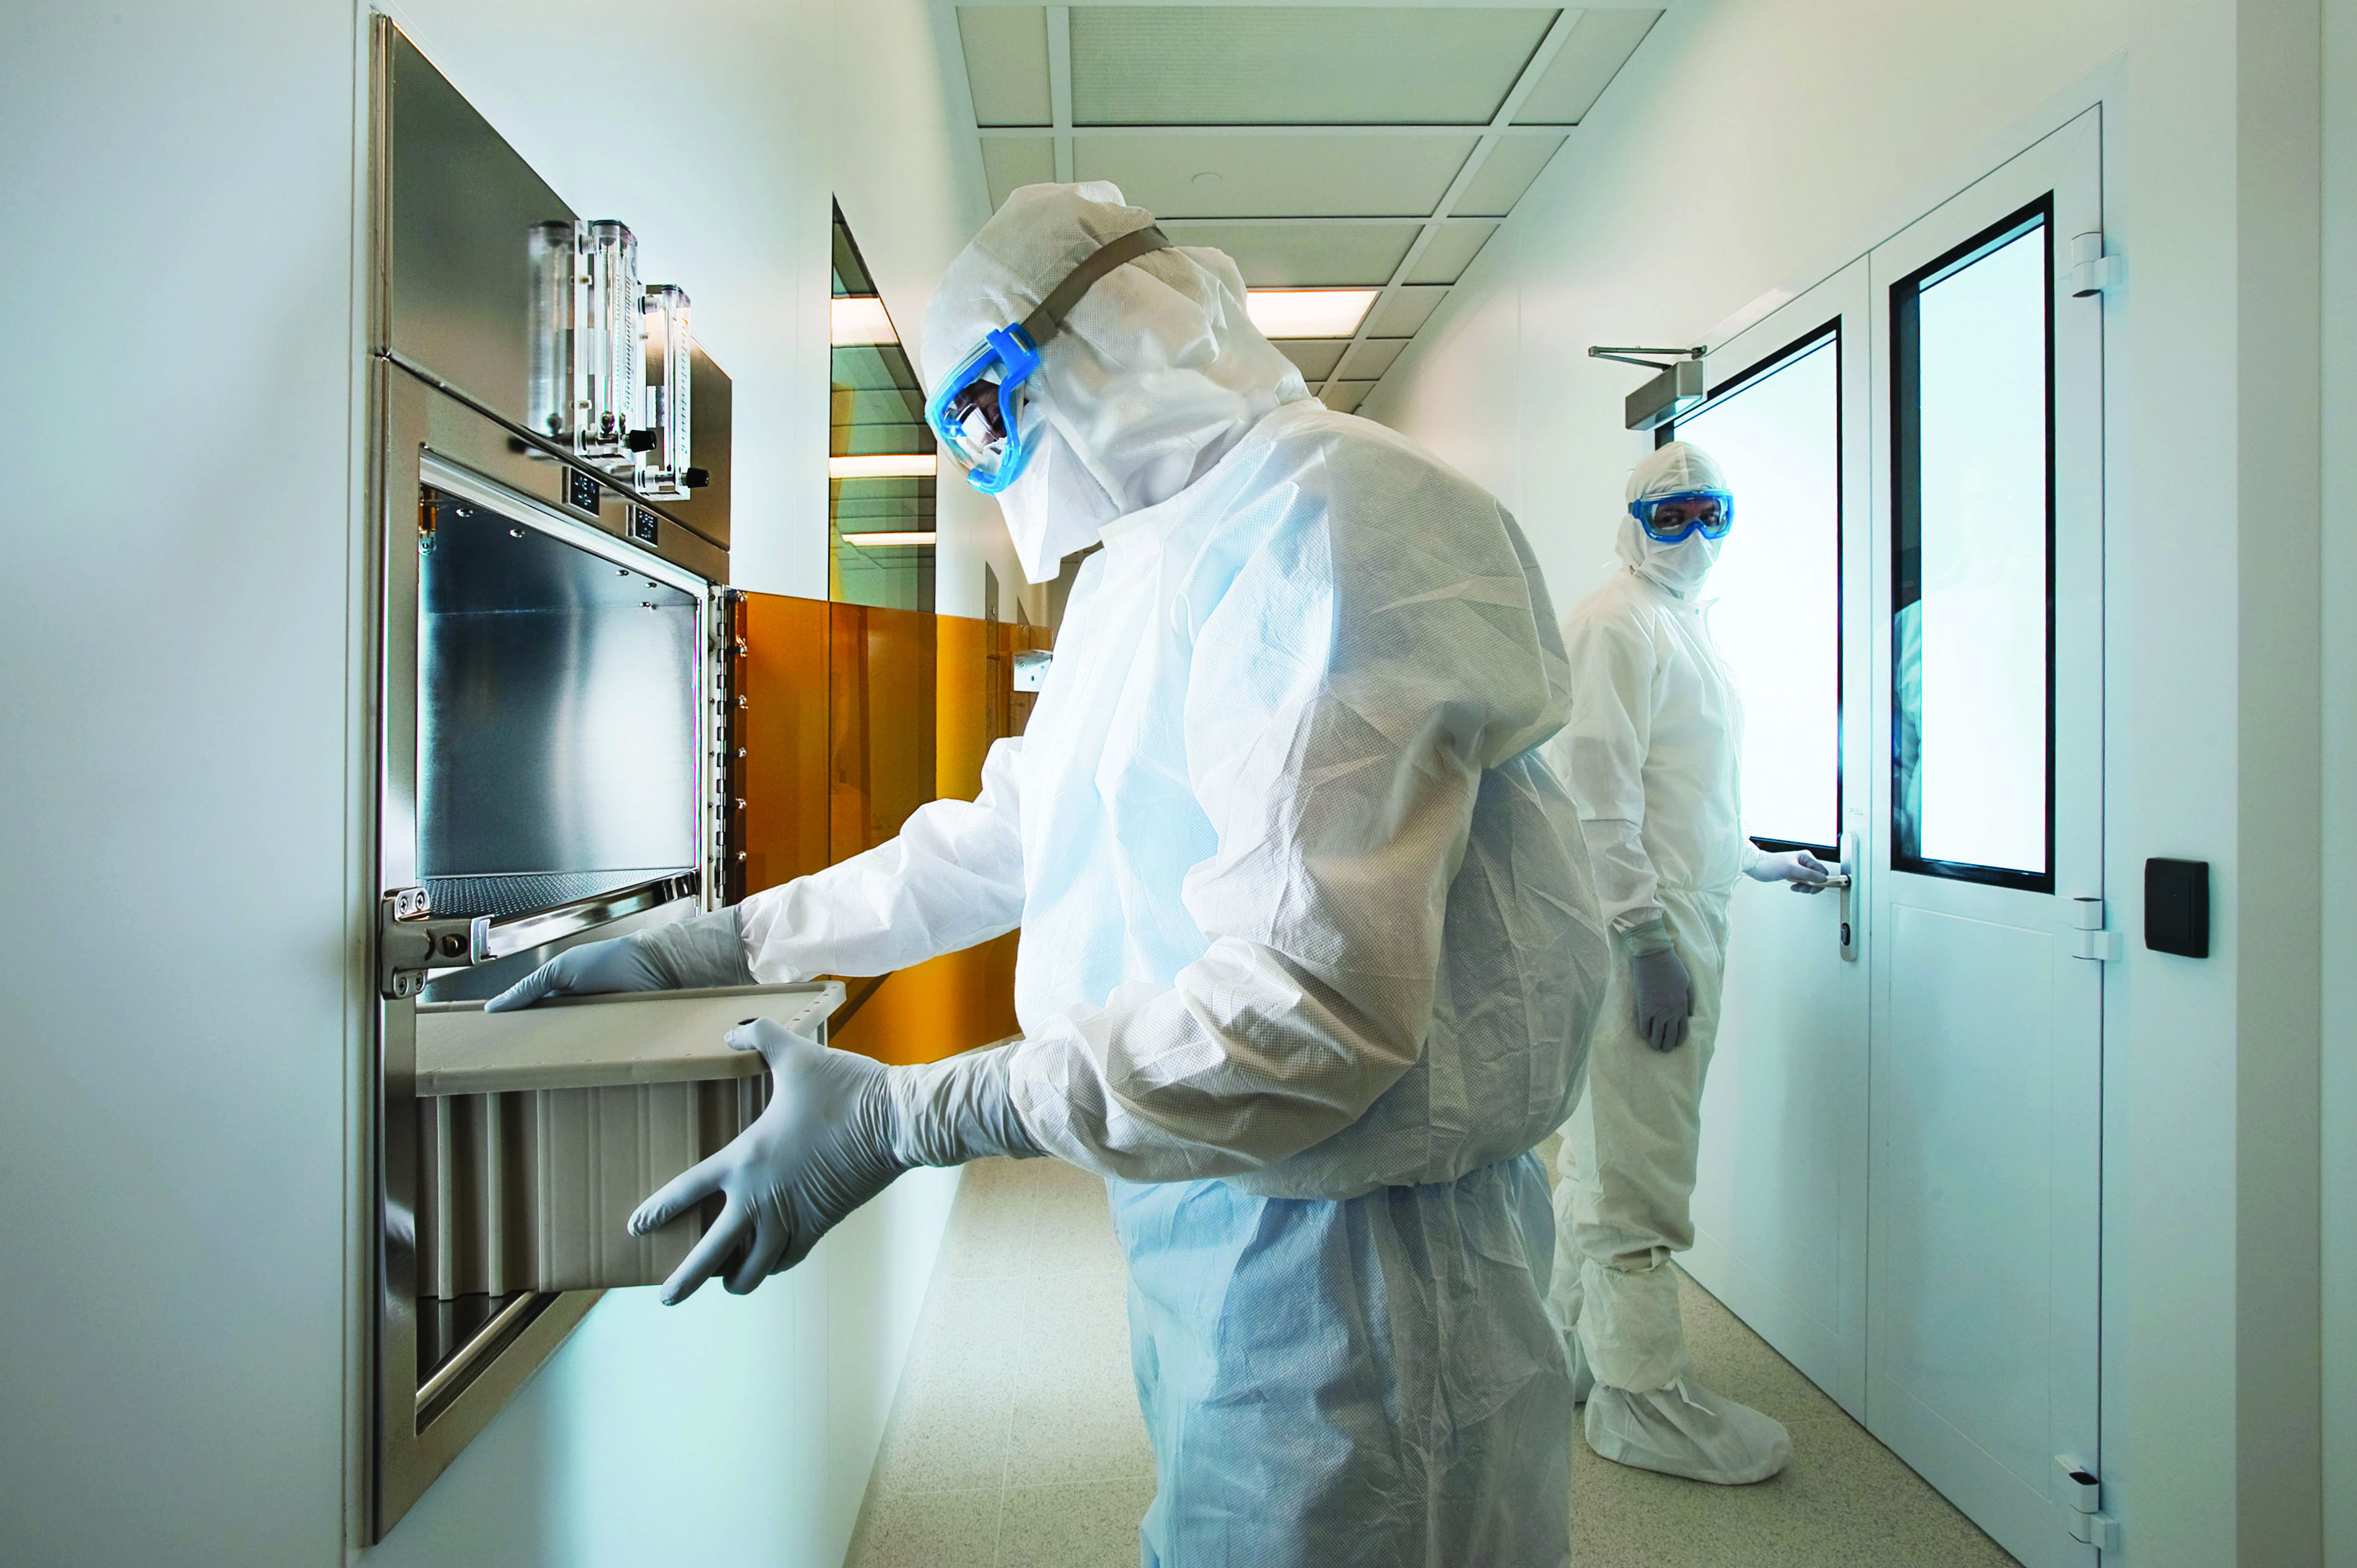 Cleanroom Gowning Procedures Step By Step | Bennett & Bennett,